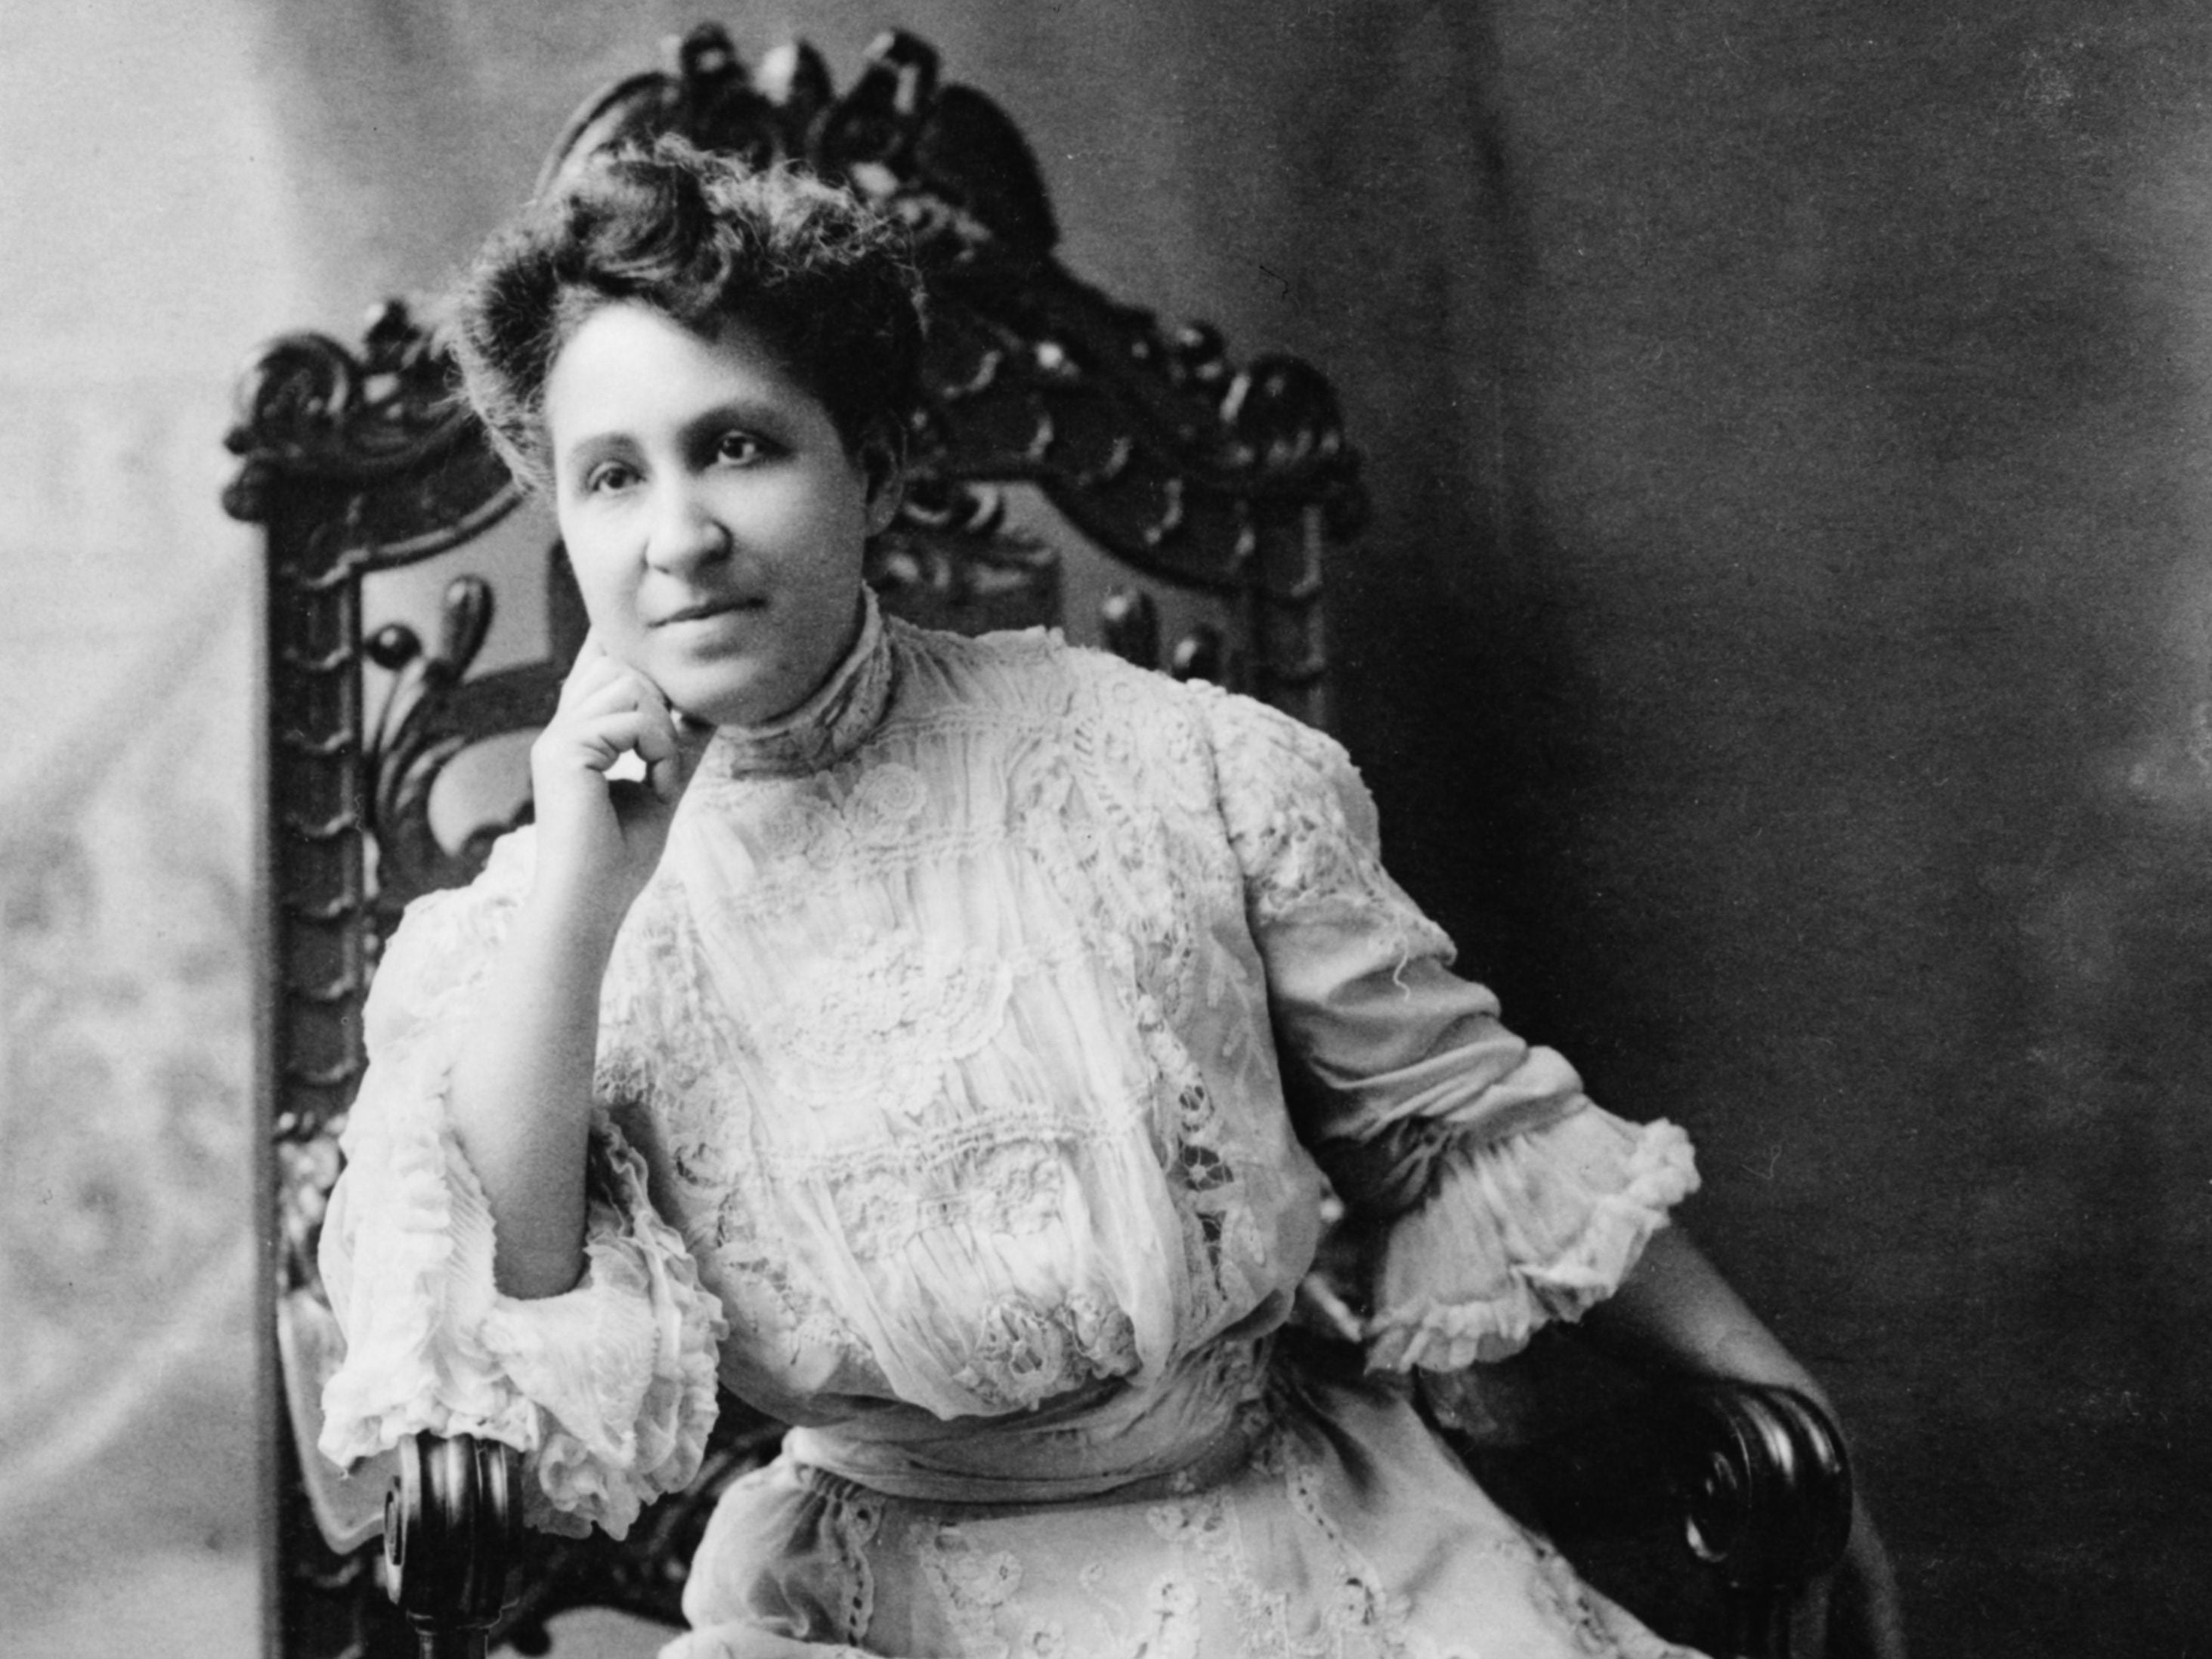 A black and white photo of Mary Church Terrell in a white dress sitting in an intricately carved chair.